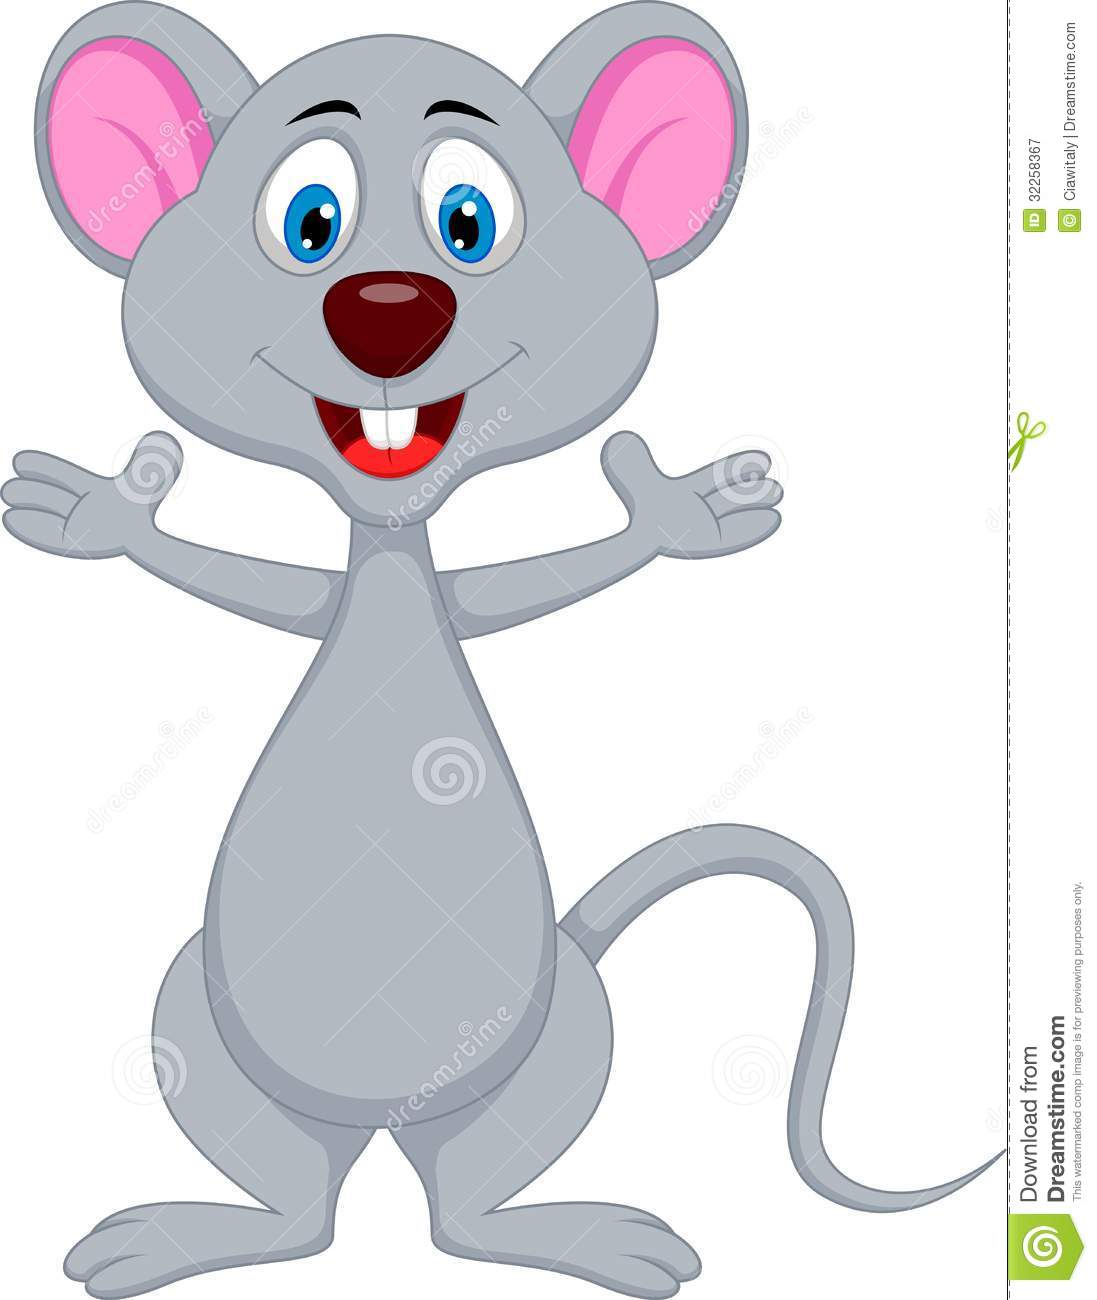 Funny Mouse Cartoon Royalty Free Stock Photography   Image  32258367